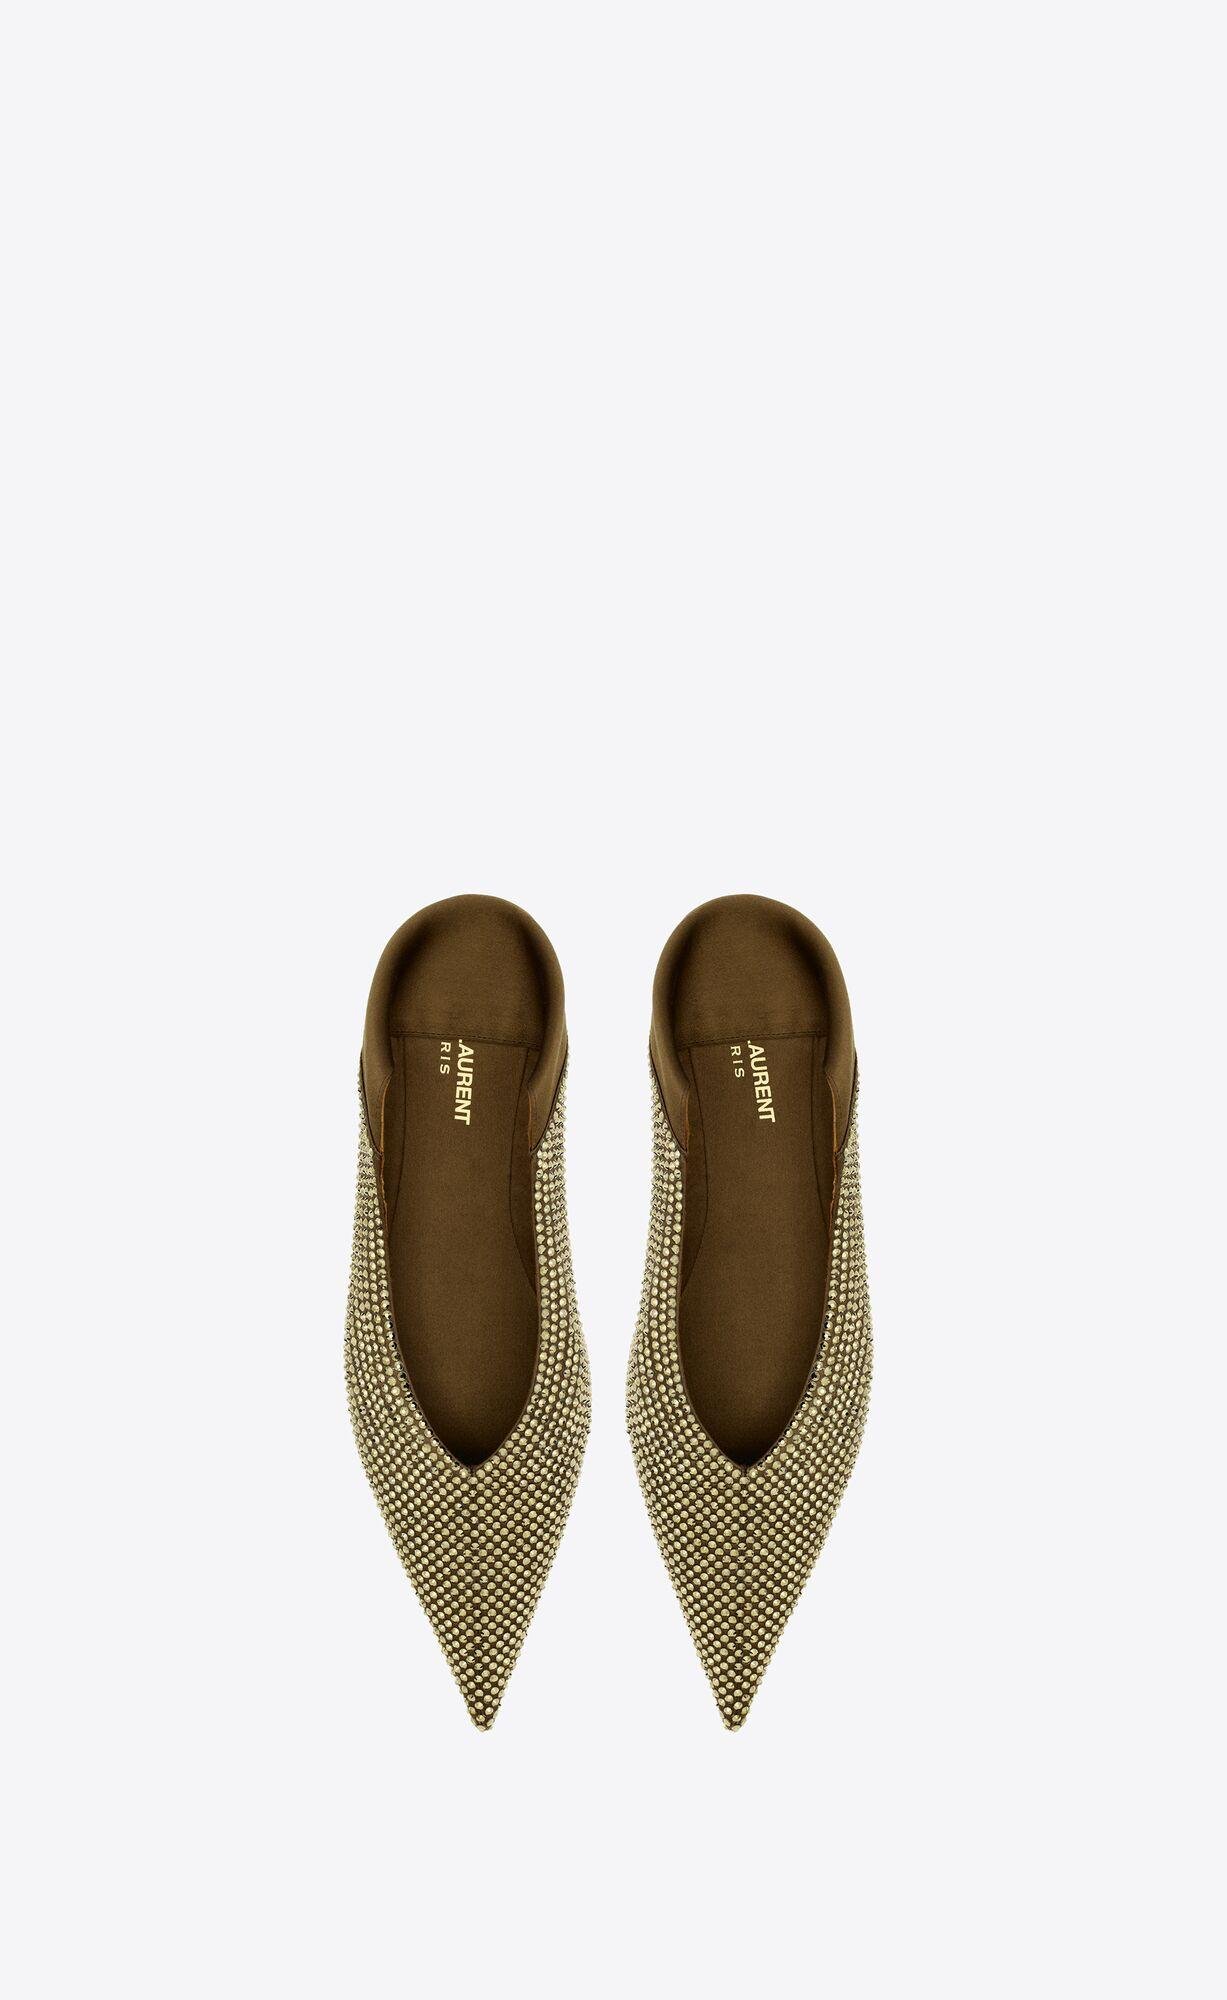 nour slippers in satin crepe and rhinestones by SAINT LAURENT